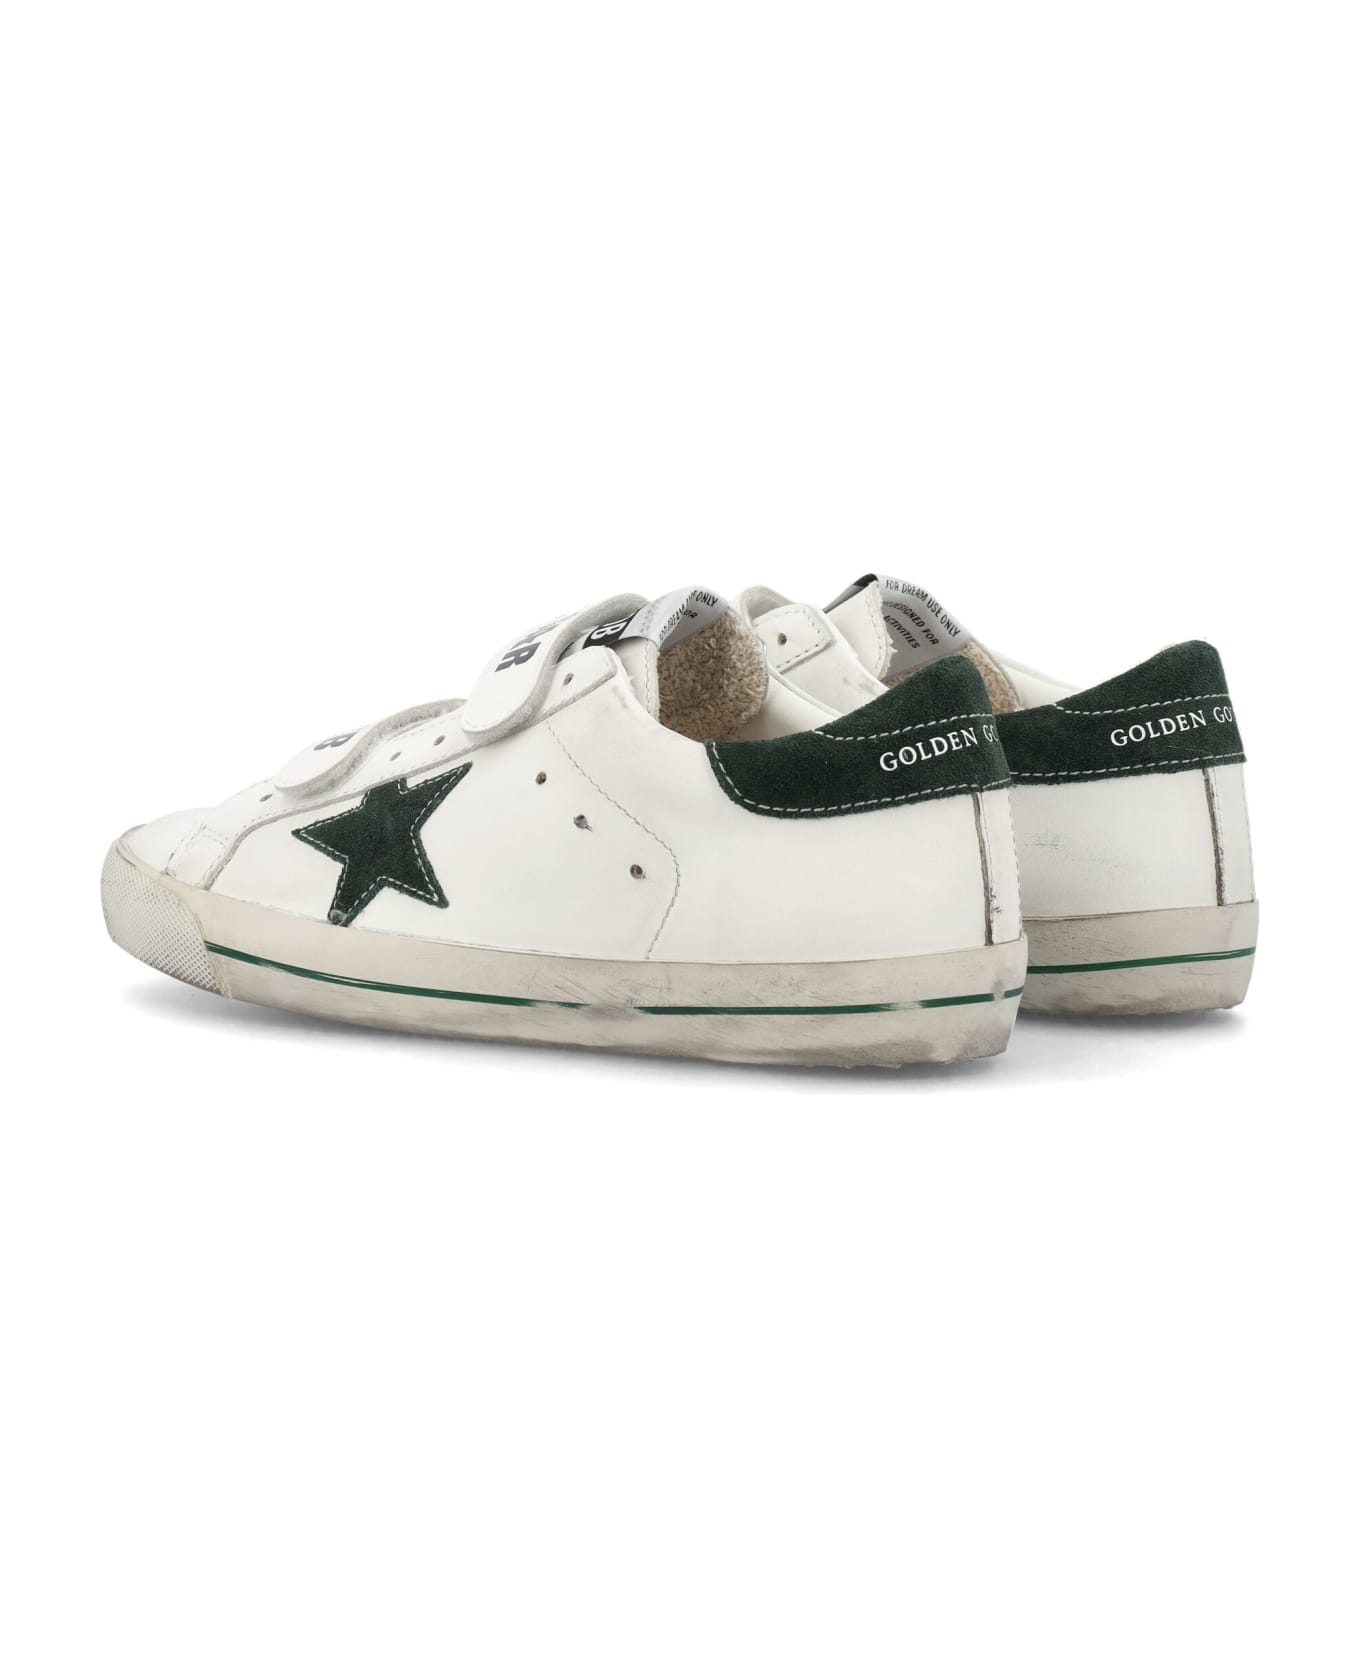 Golden Goose Old School Leather Sneakers - WHITE/GREEN